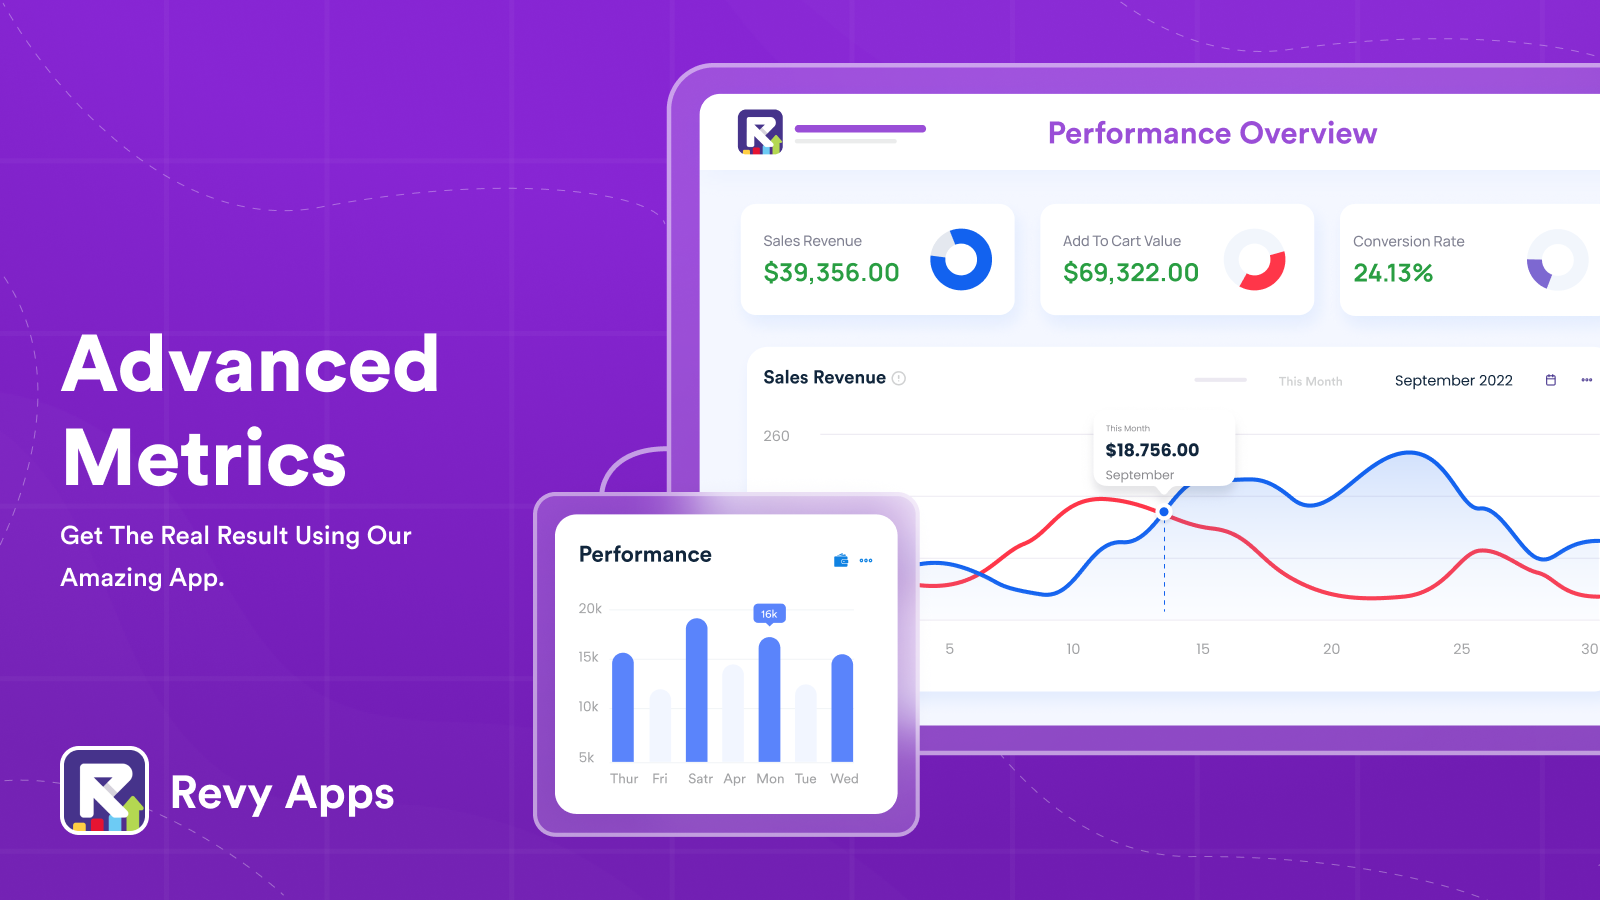 Measure the performance of upsell offers with our analytics.